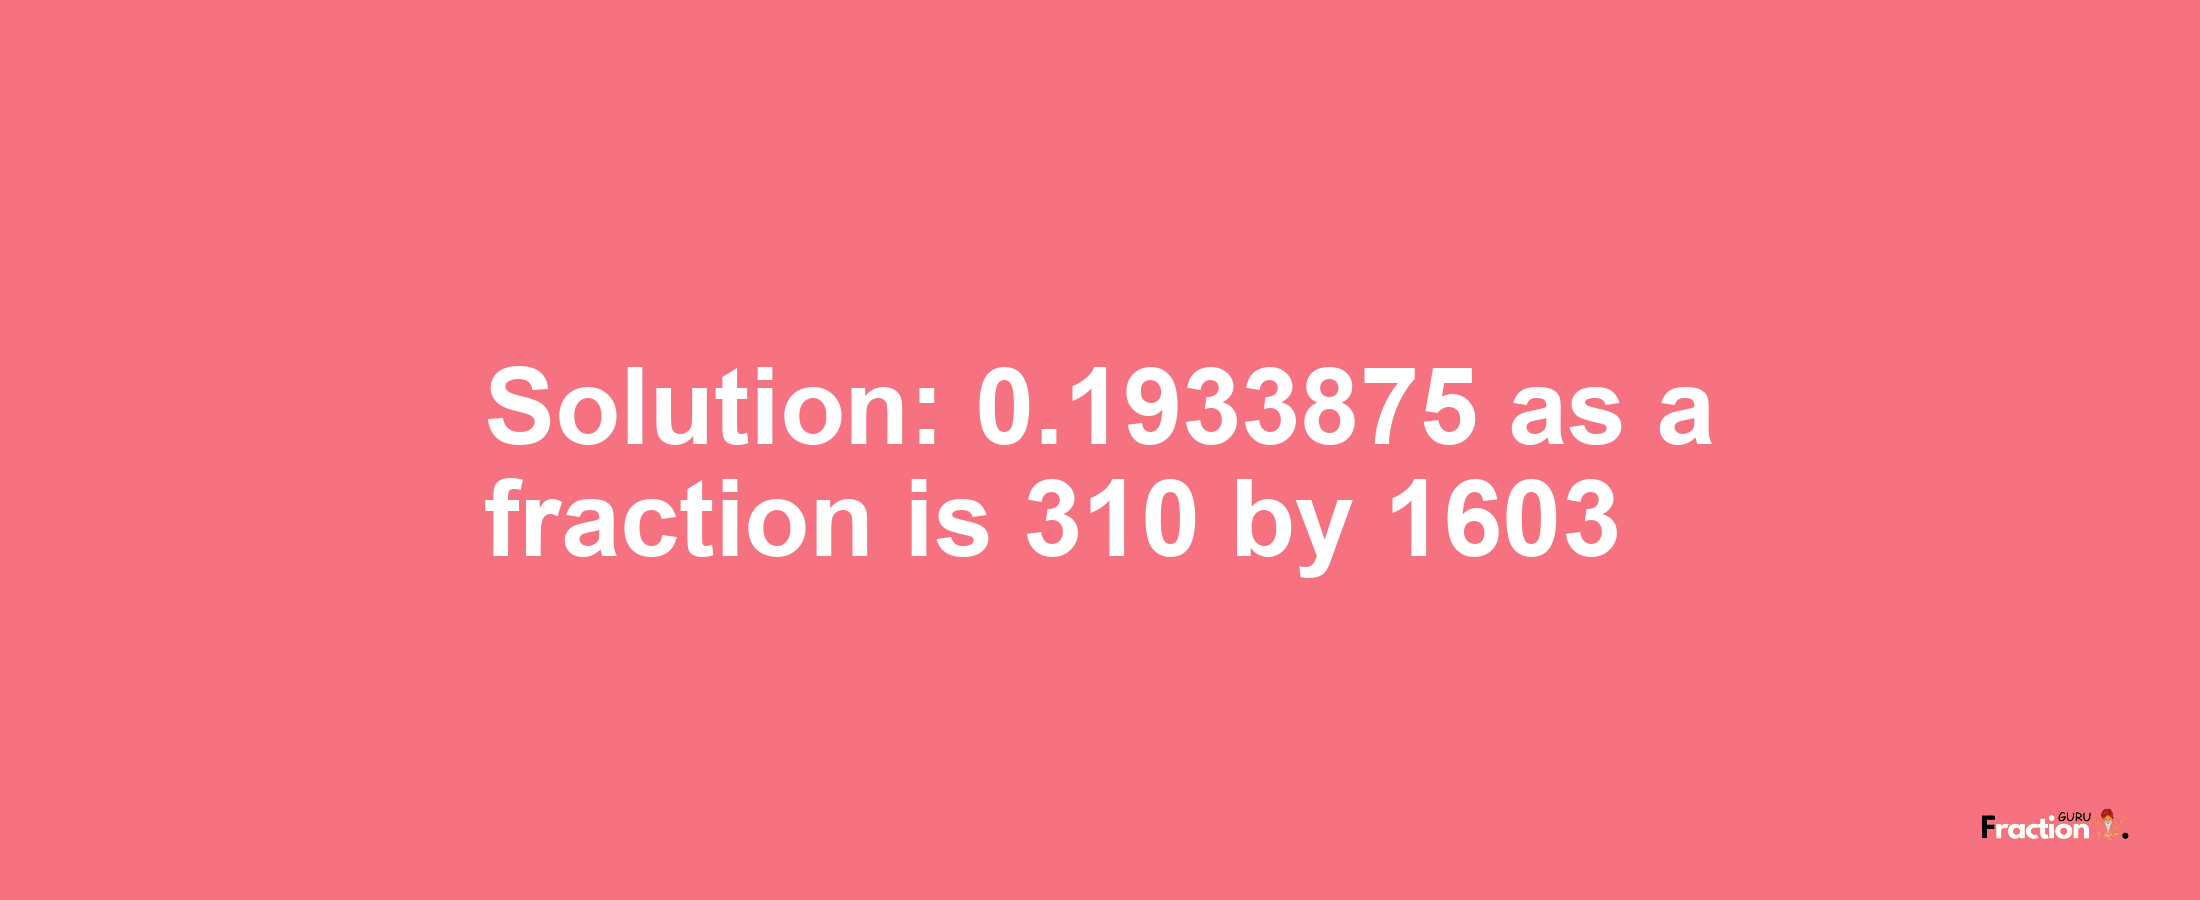 Solution:0.1933875 as a fraction is 310/1603